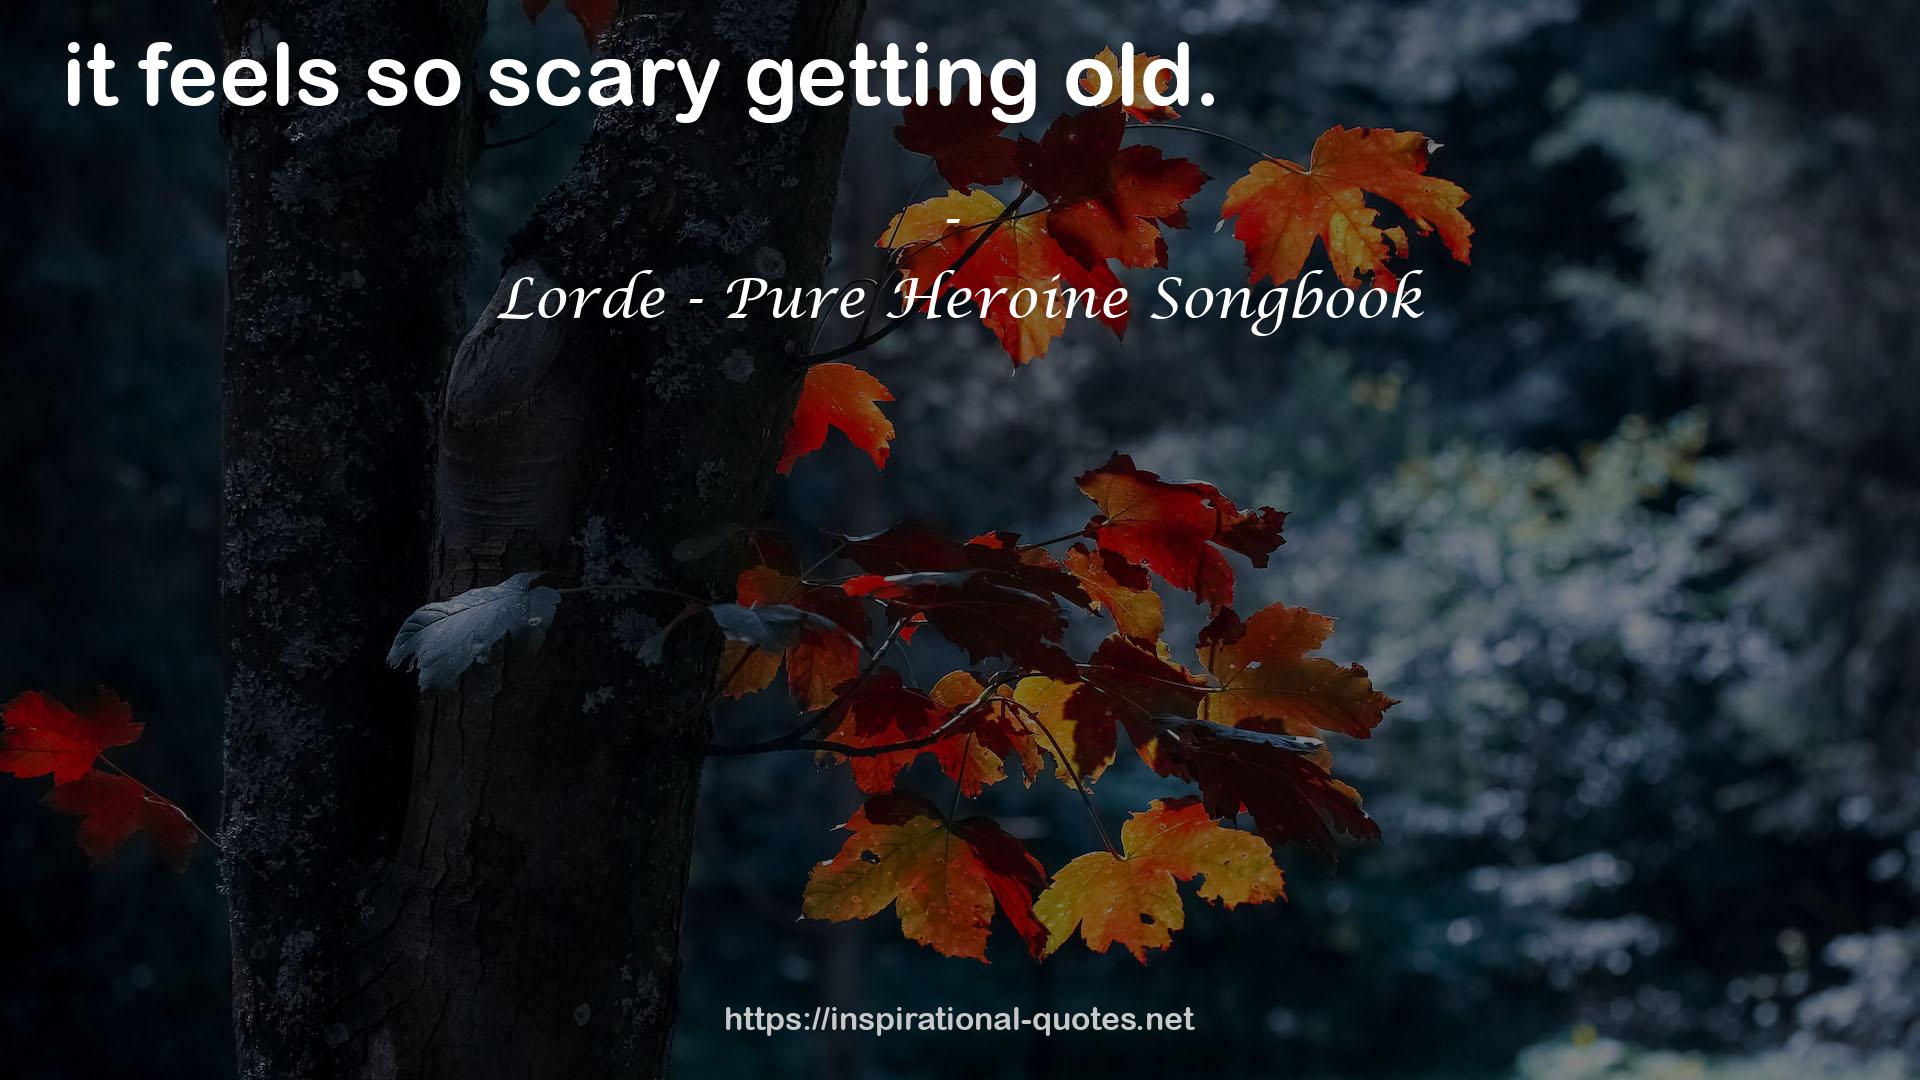 Lorde - Pure Heroine Songbook QUOTES